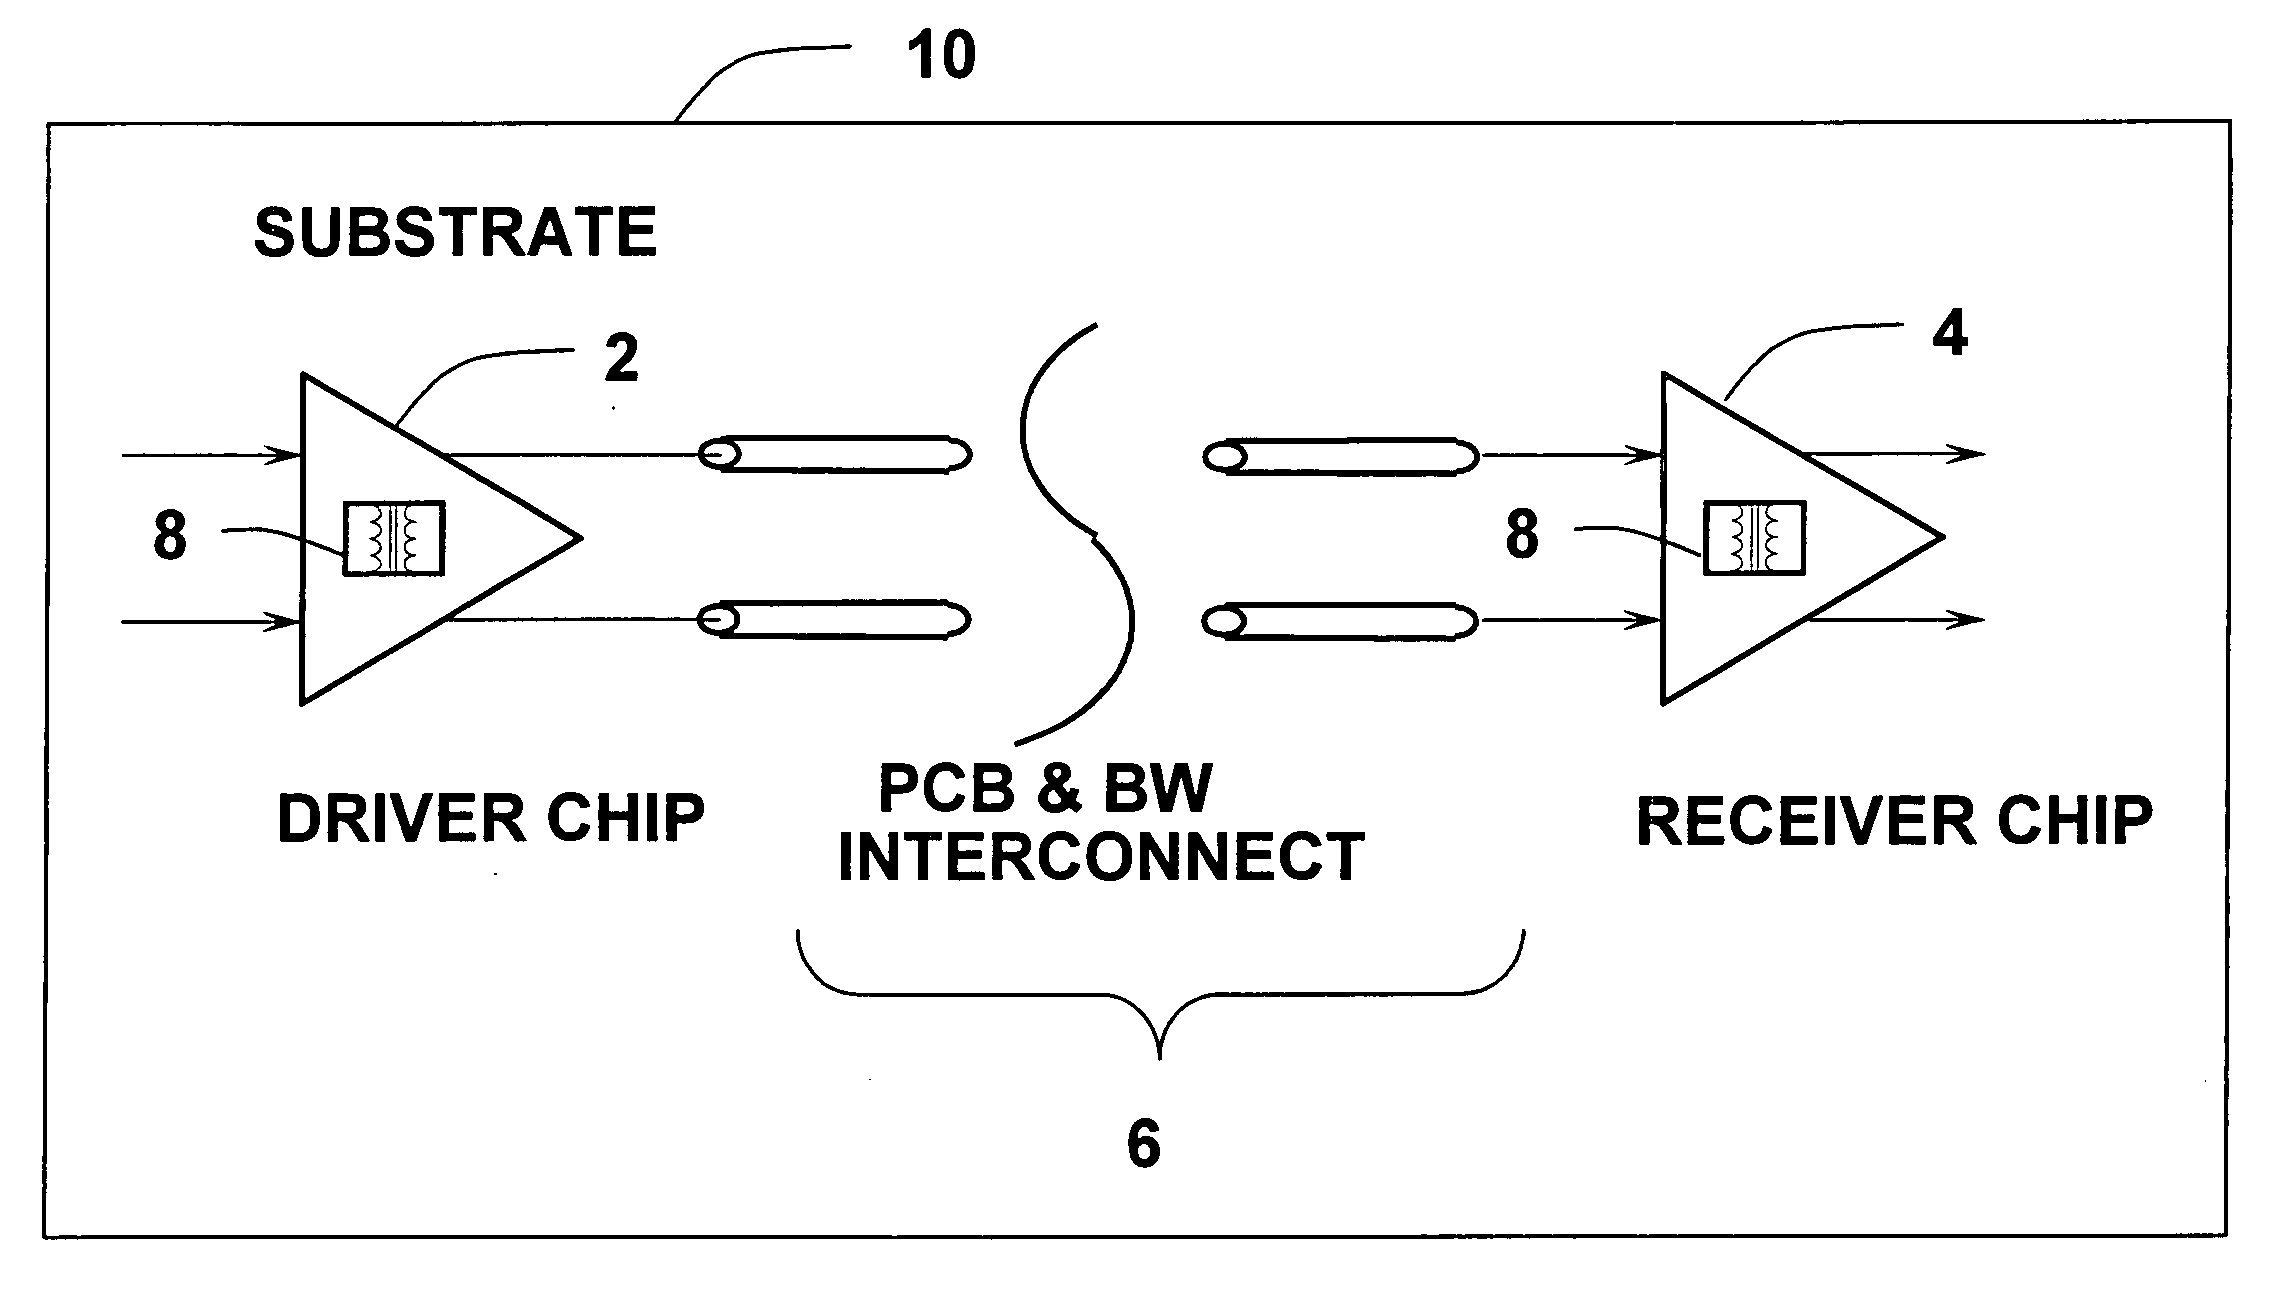 ESD device for high speed data communication system with improved bandwidth